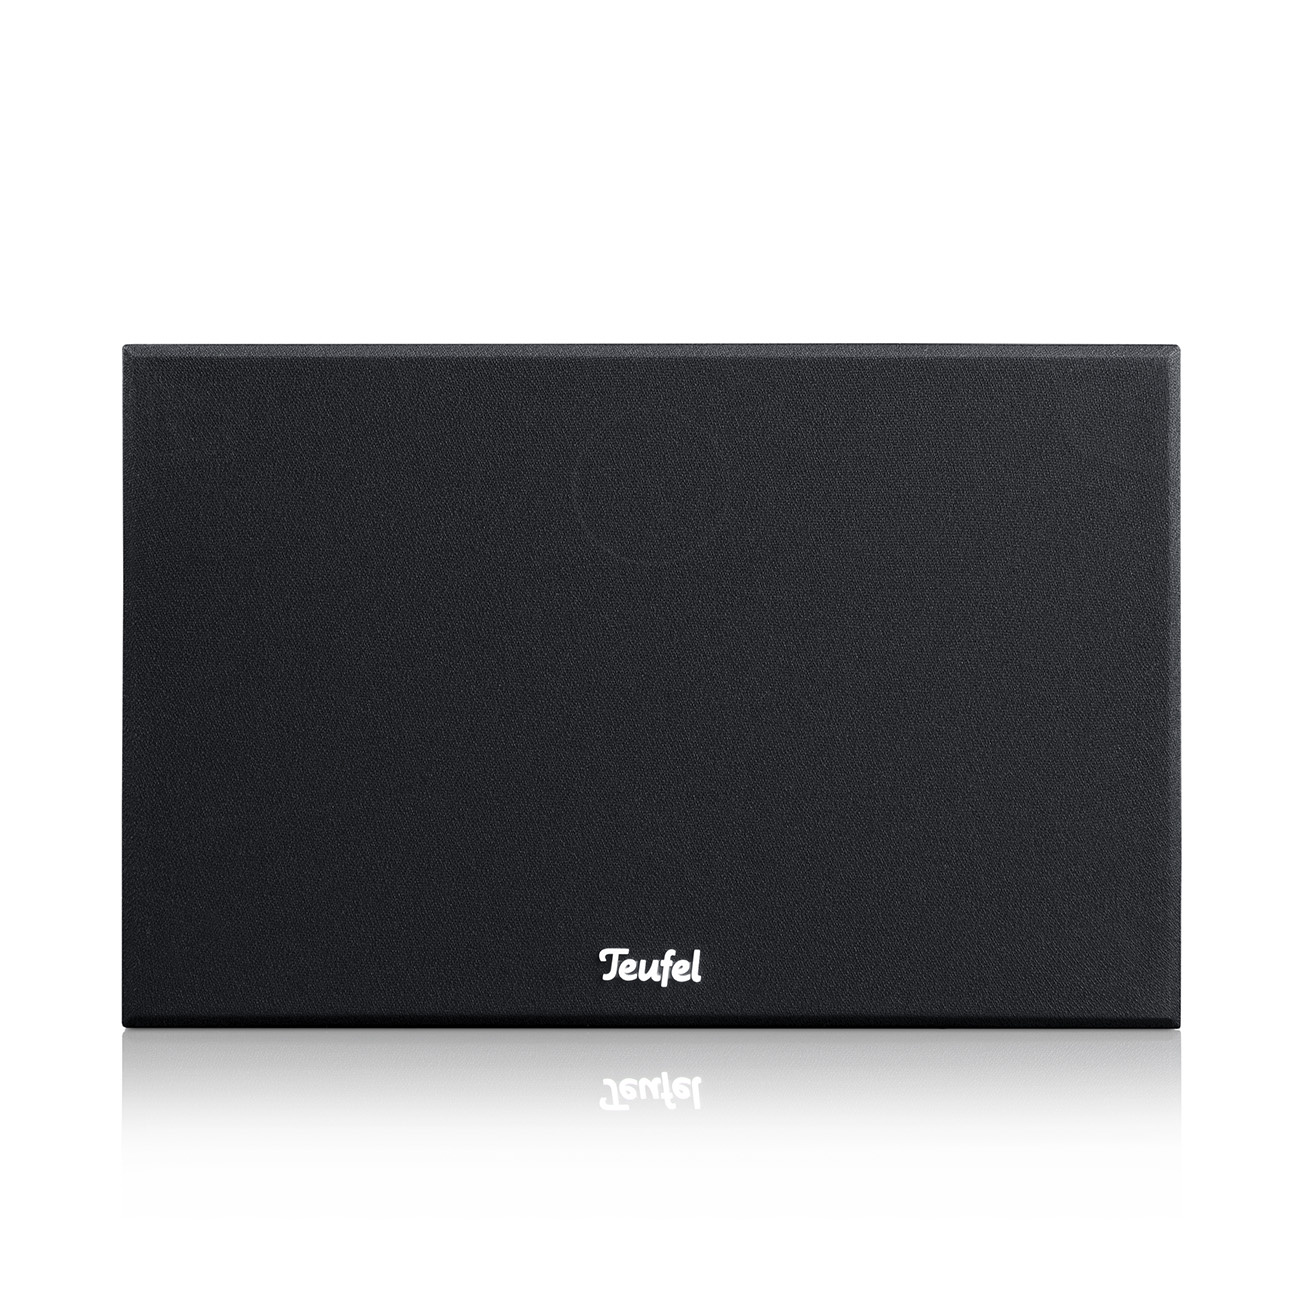 system-6-thx-select-fcr-front-straight-black-cover-1300x1300x72.jpg